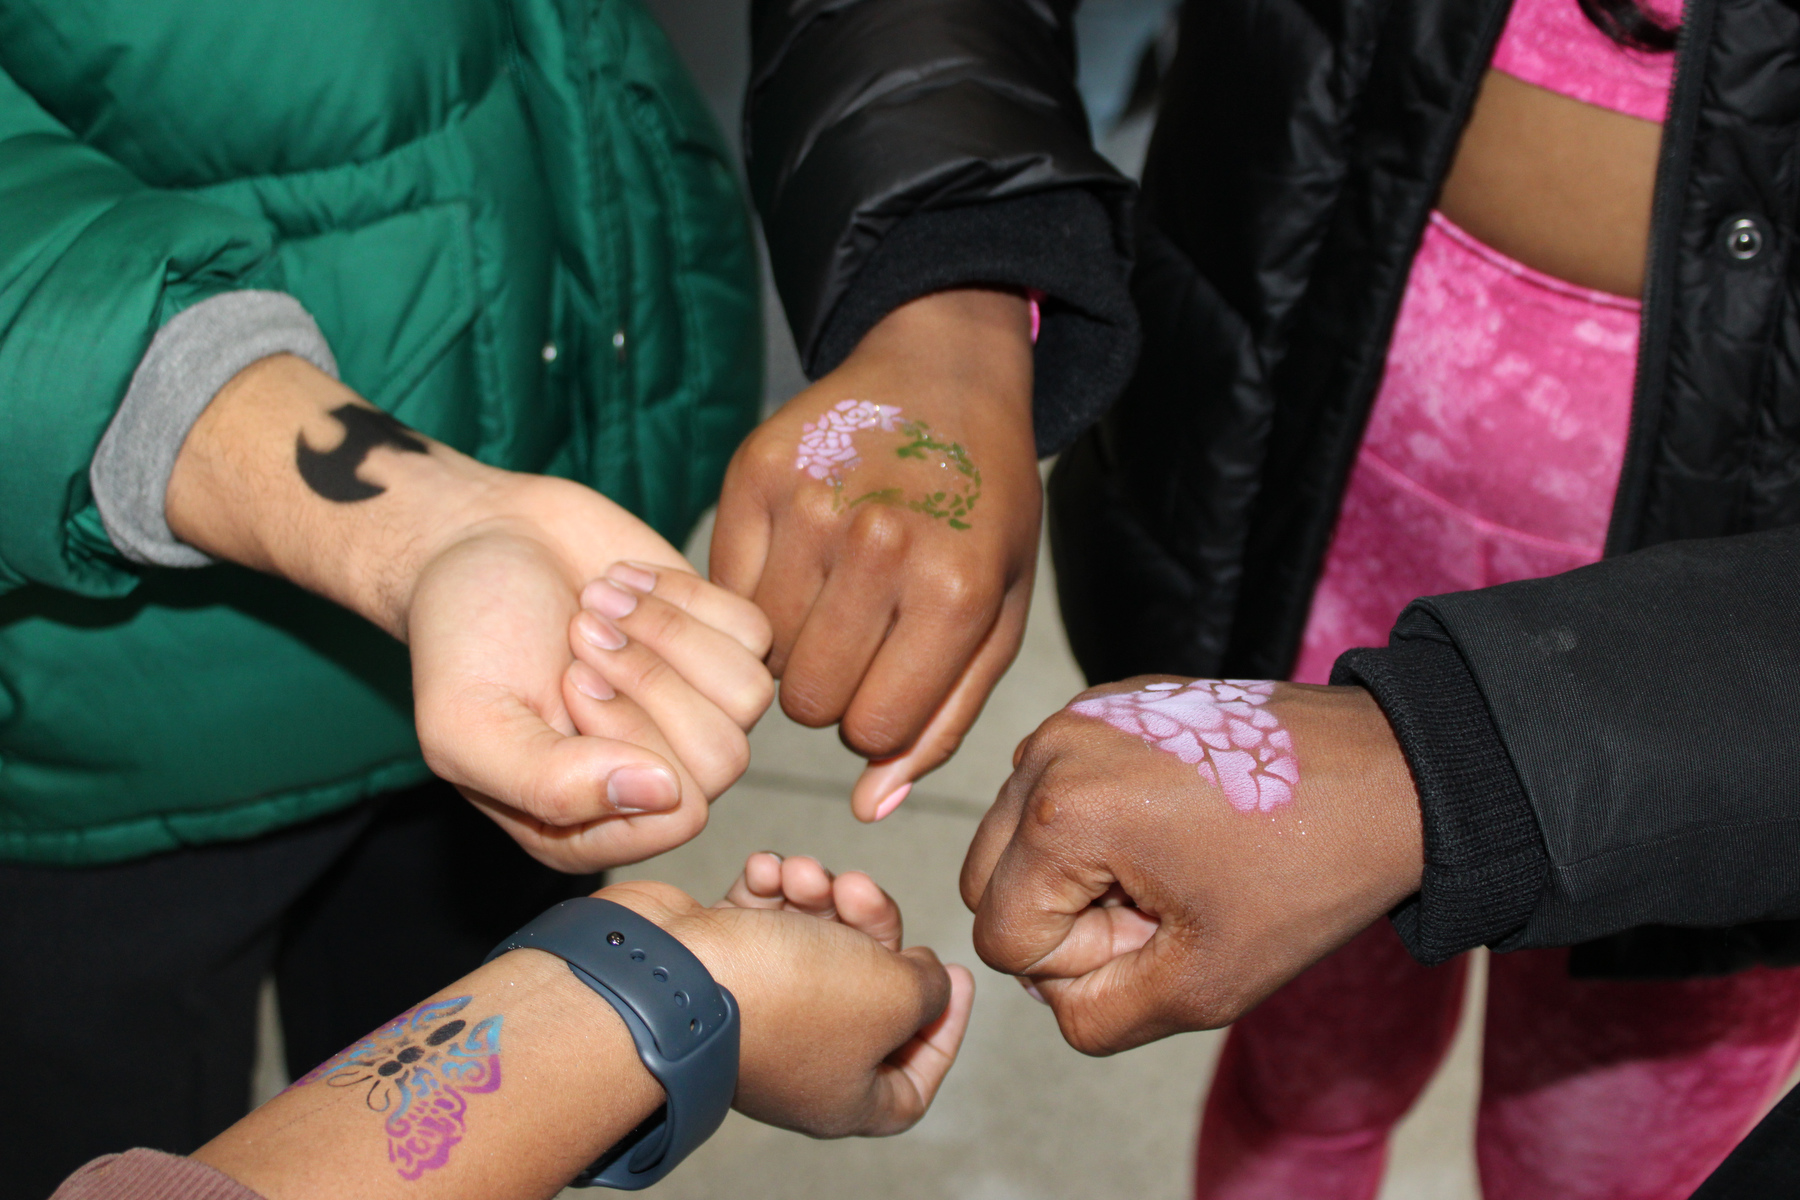 Winterfest on Jan. 28 welcomed SUNY Oswego students back after the first week of classes. Popular activities included henna tattoos, Build-a-Buddy, food, games, a snow globe, a hot chocolate station and much more.